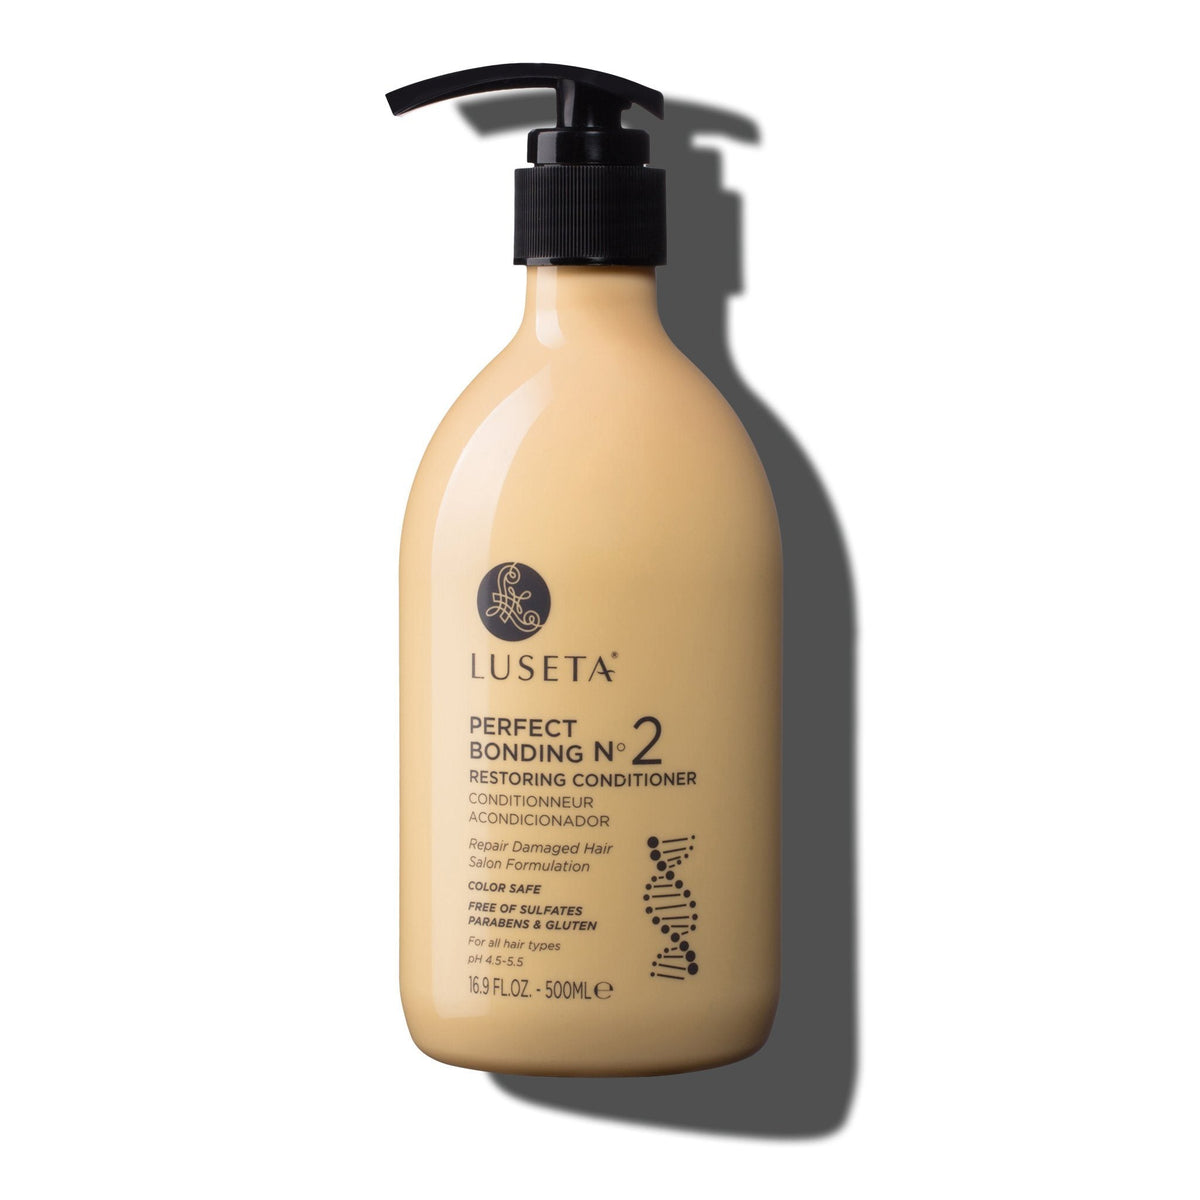 Perfect Bonding Restoring Conditioner - 16.9oz - by Luseta Beauty |ProCare Outlet|